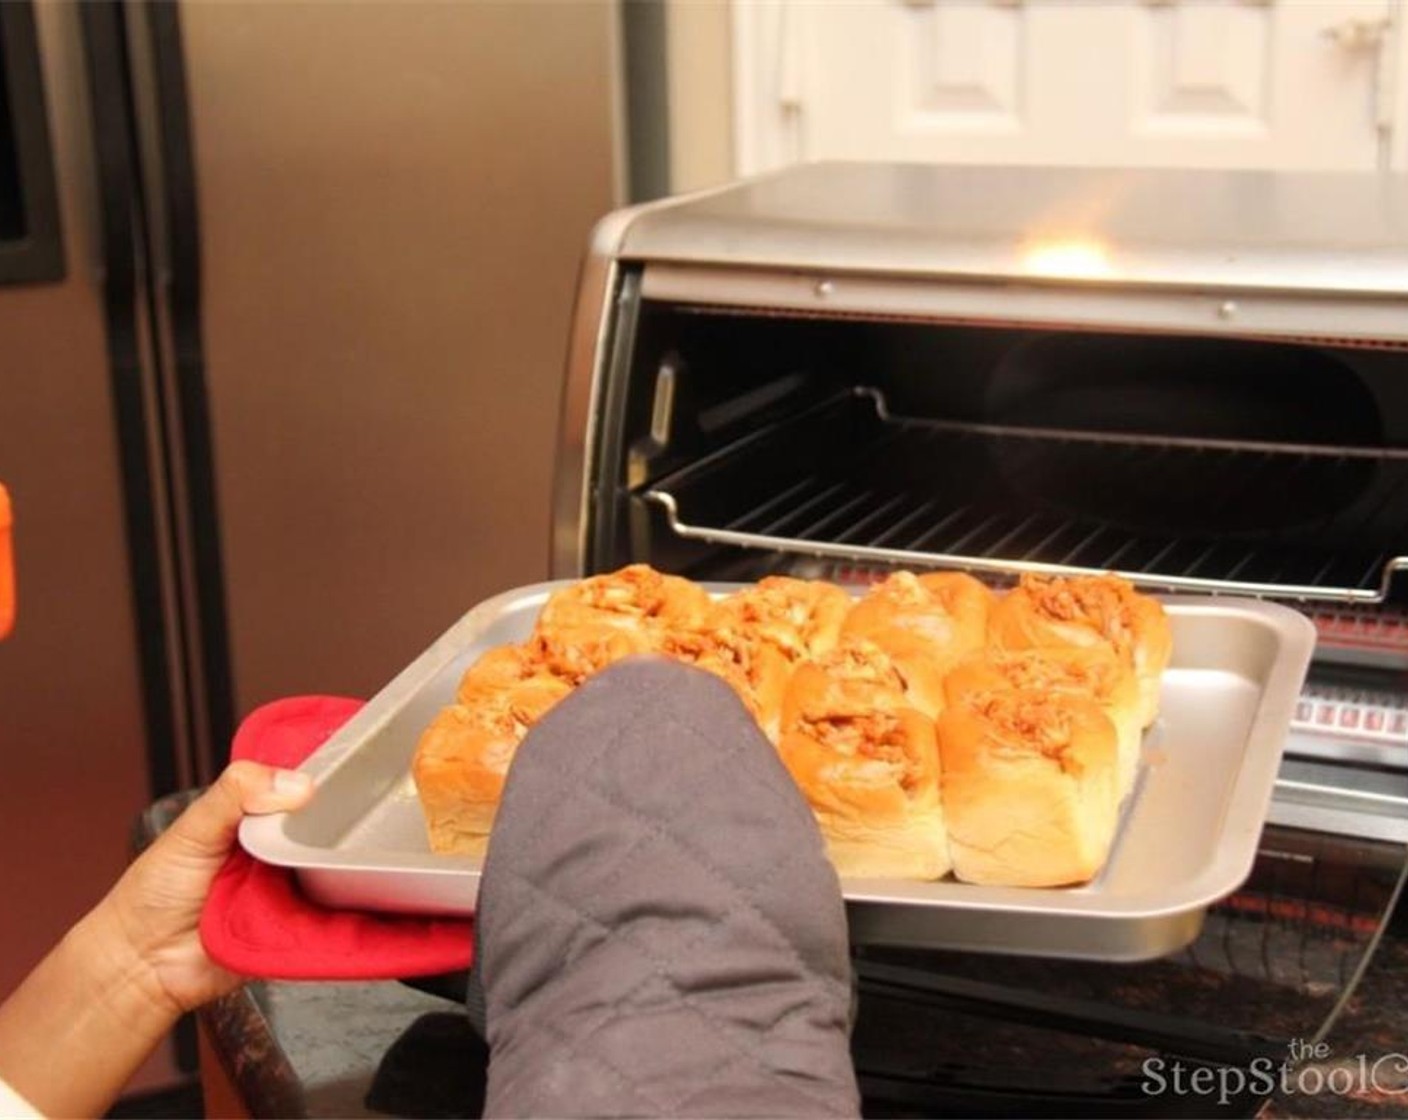 step 6 Place in toaster oven or regular oven at 350 degrees F (180 degrees C) for approximately 5 minutes or until warm.